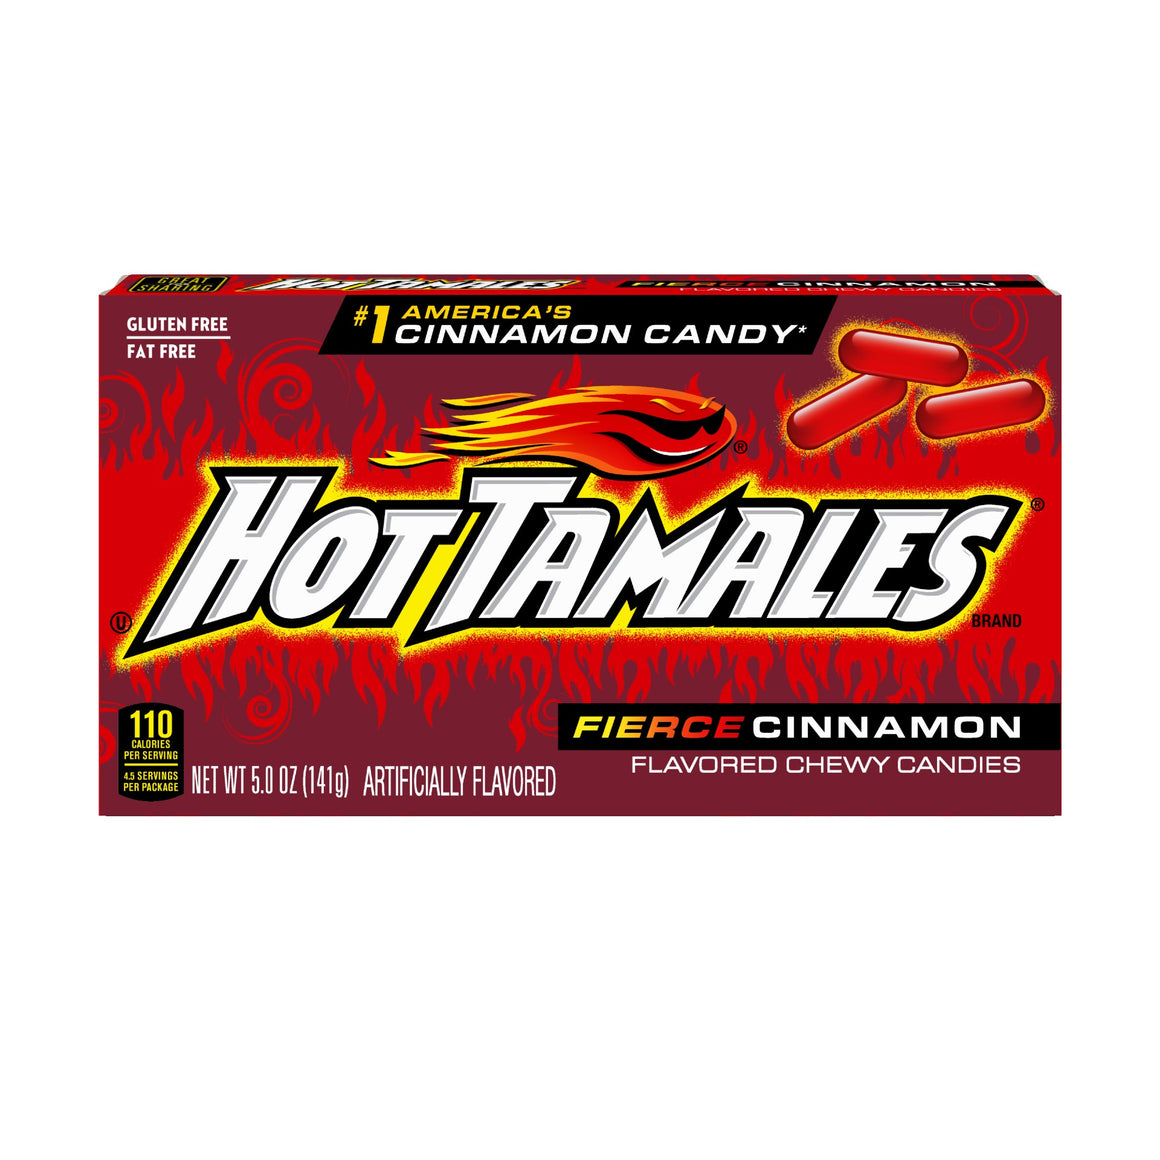 All City Candy Hot Tamales Fierce Cinnamon Chewy Candies - 5-oz. Theater Box 1 Box Theater Boxes Just Born Inc For fresh candy and great service, visit www.allcitycandy.com